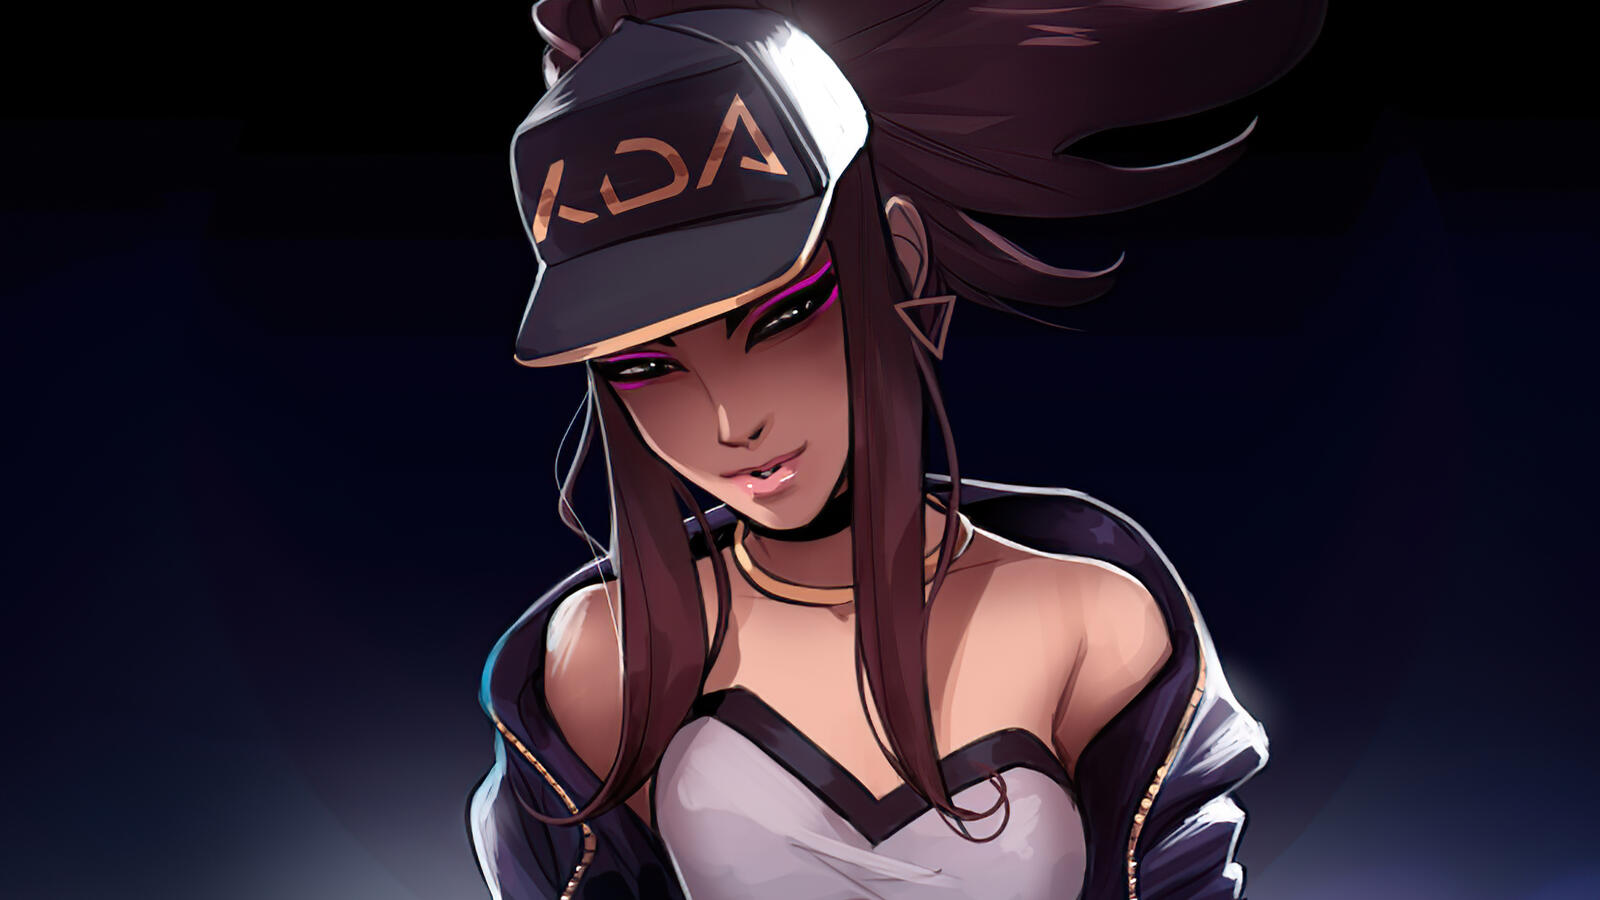 Free photo Akali with a sly look from the league of legends game, League Of Legends